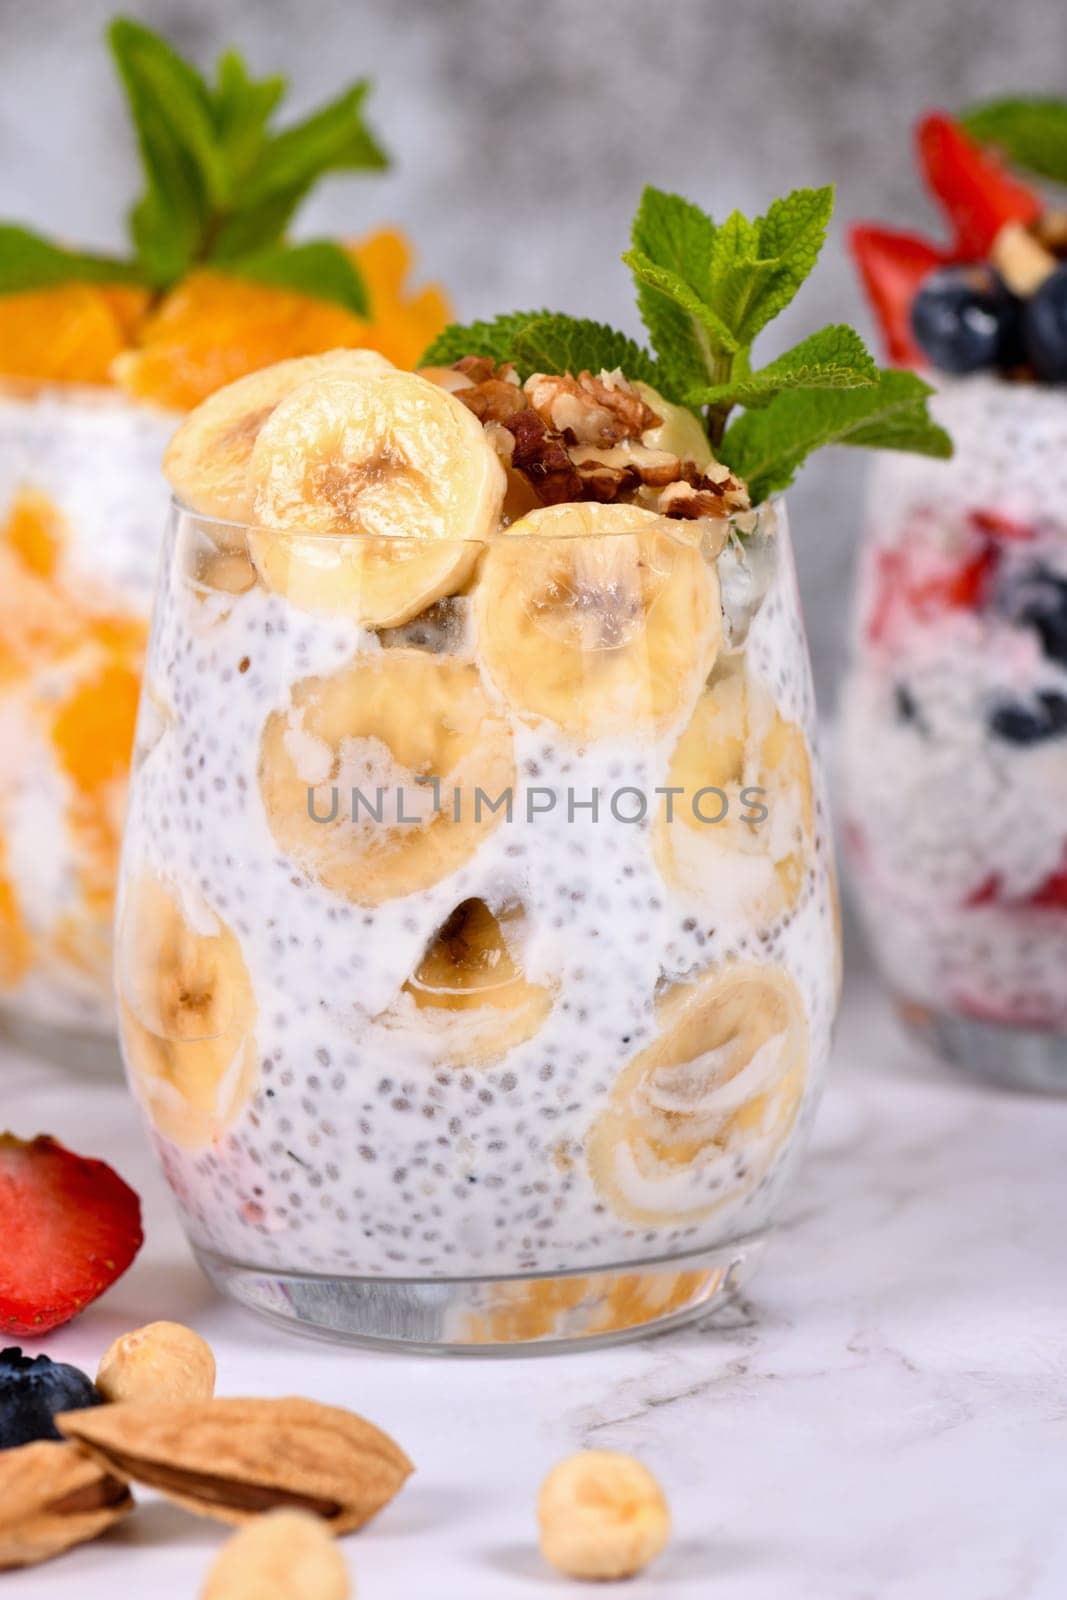 Chia Pudding with Greek Yogurt and Fruit by Apolonia